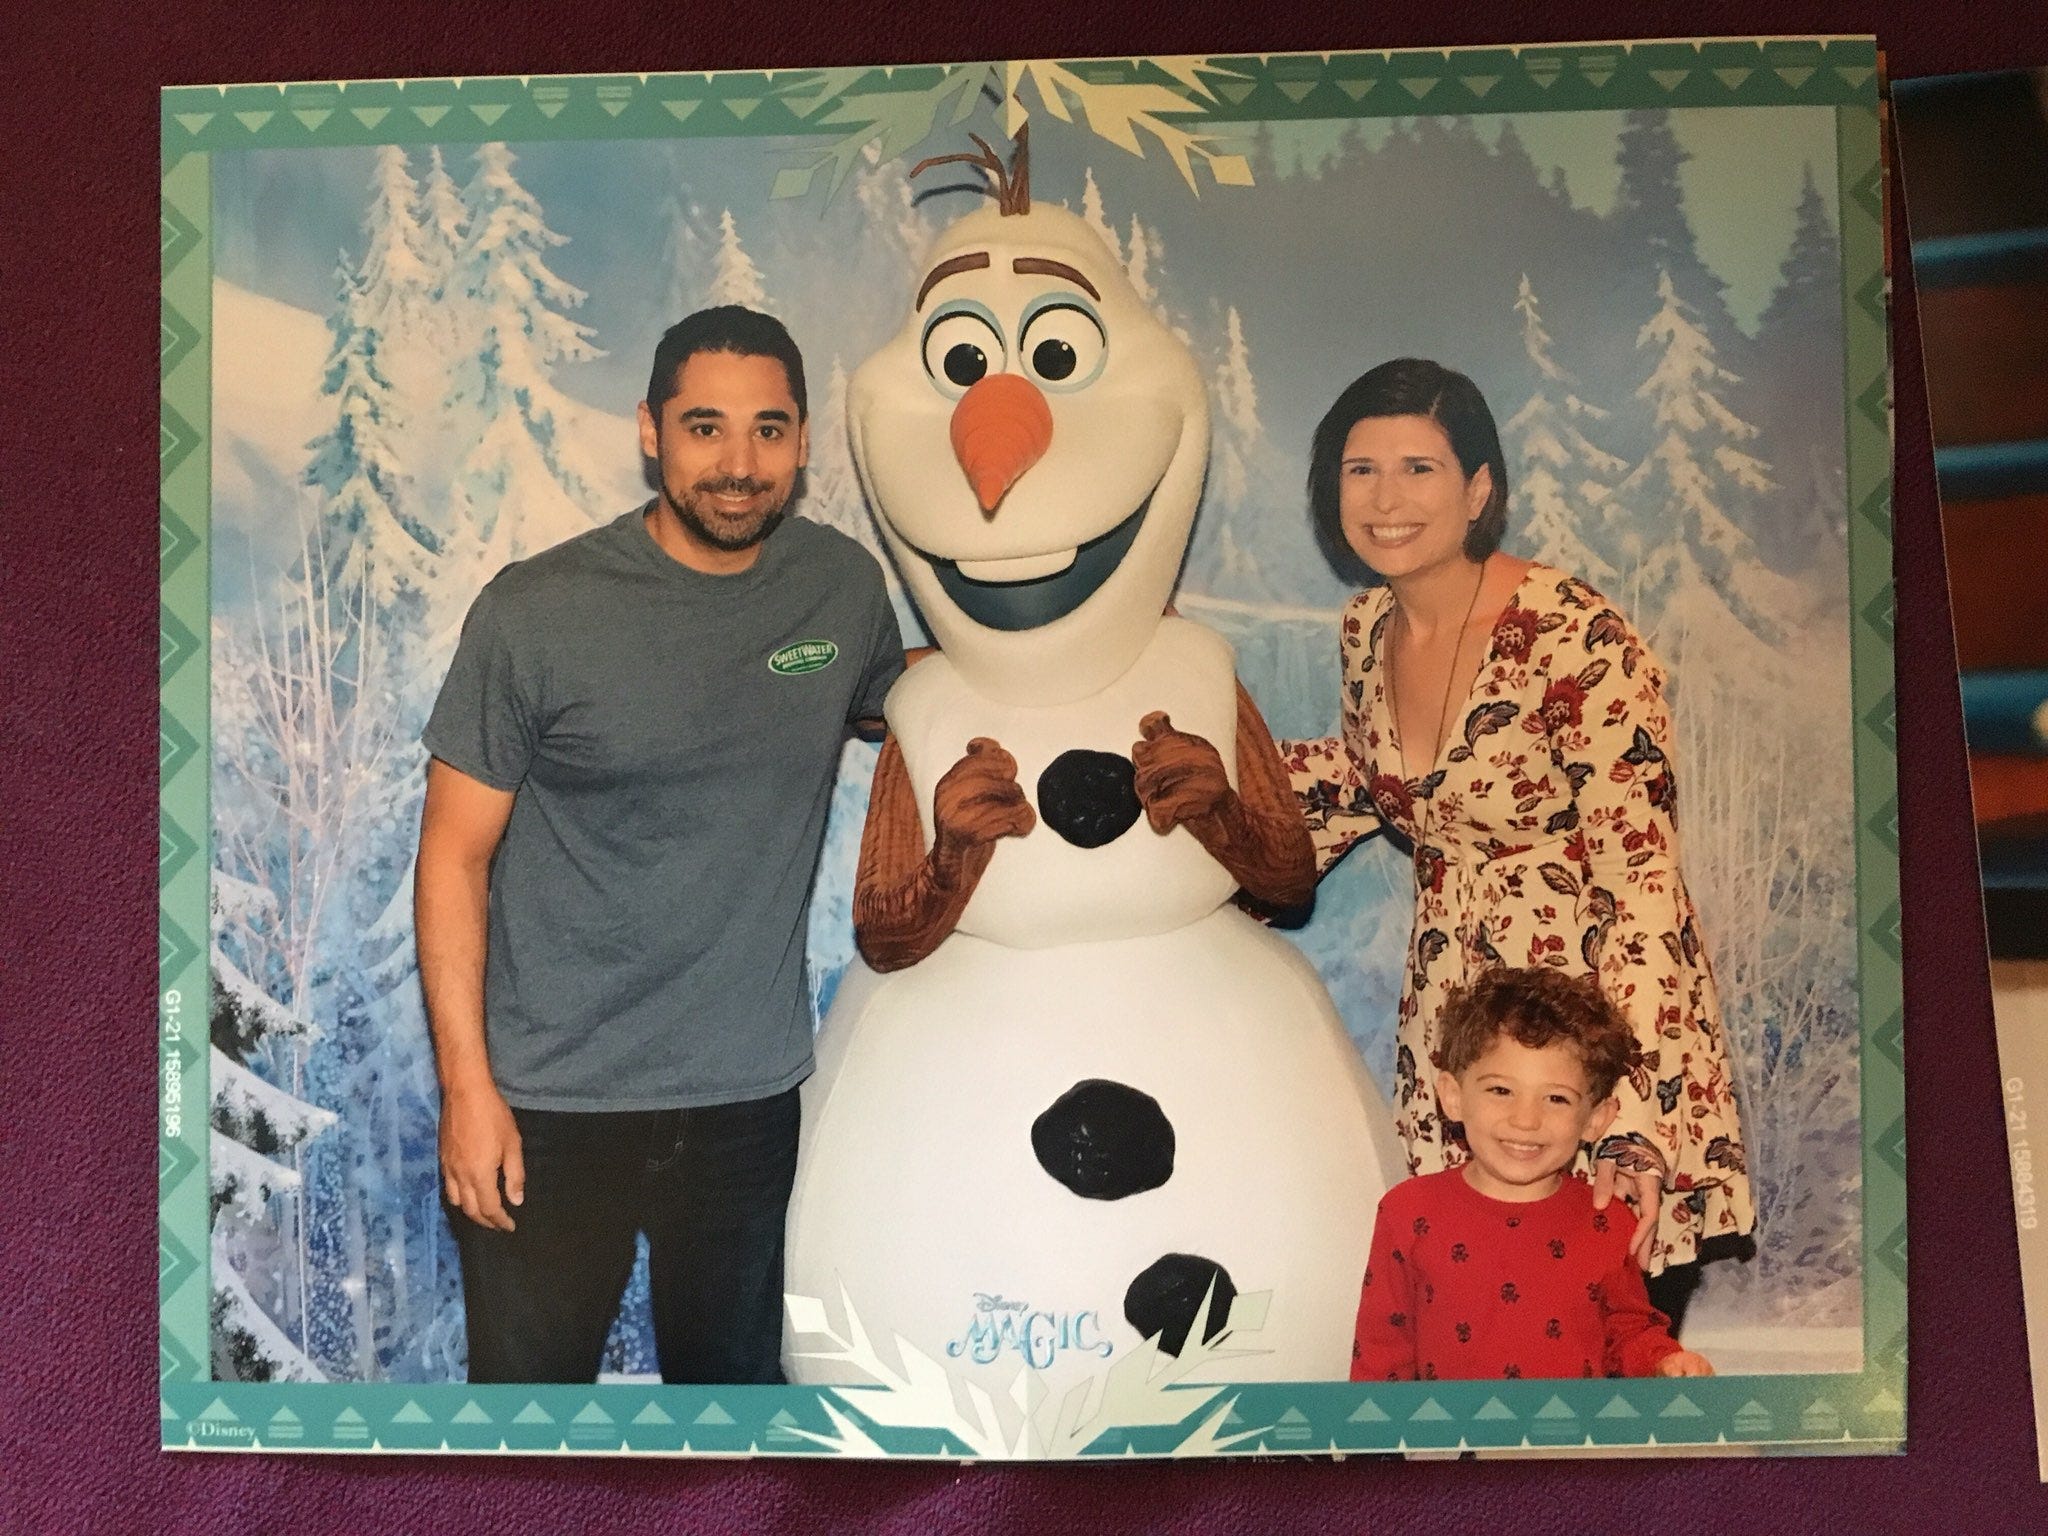 amanda adler and family posing with frozen character on cruise ship